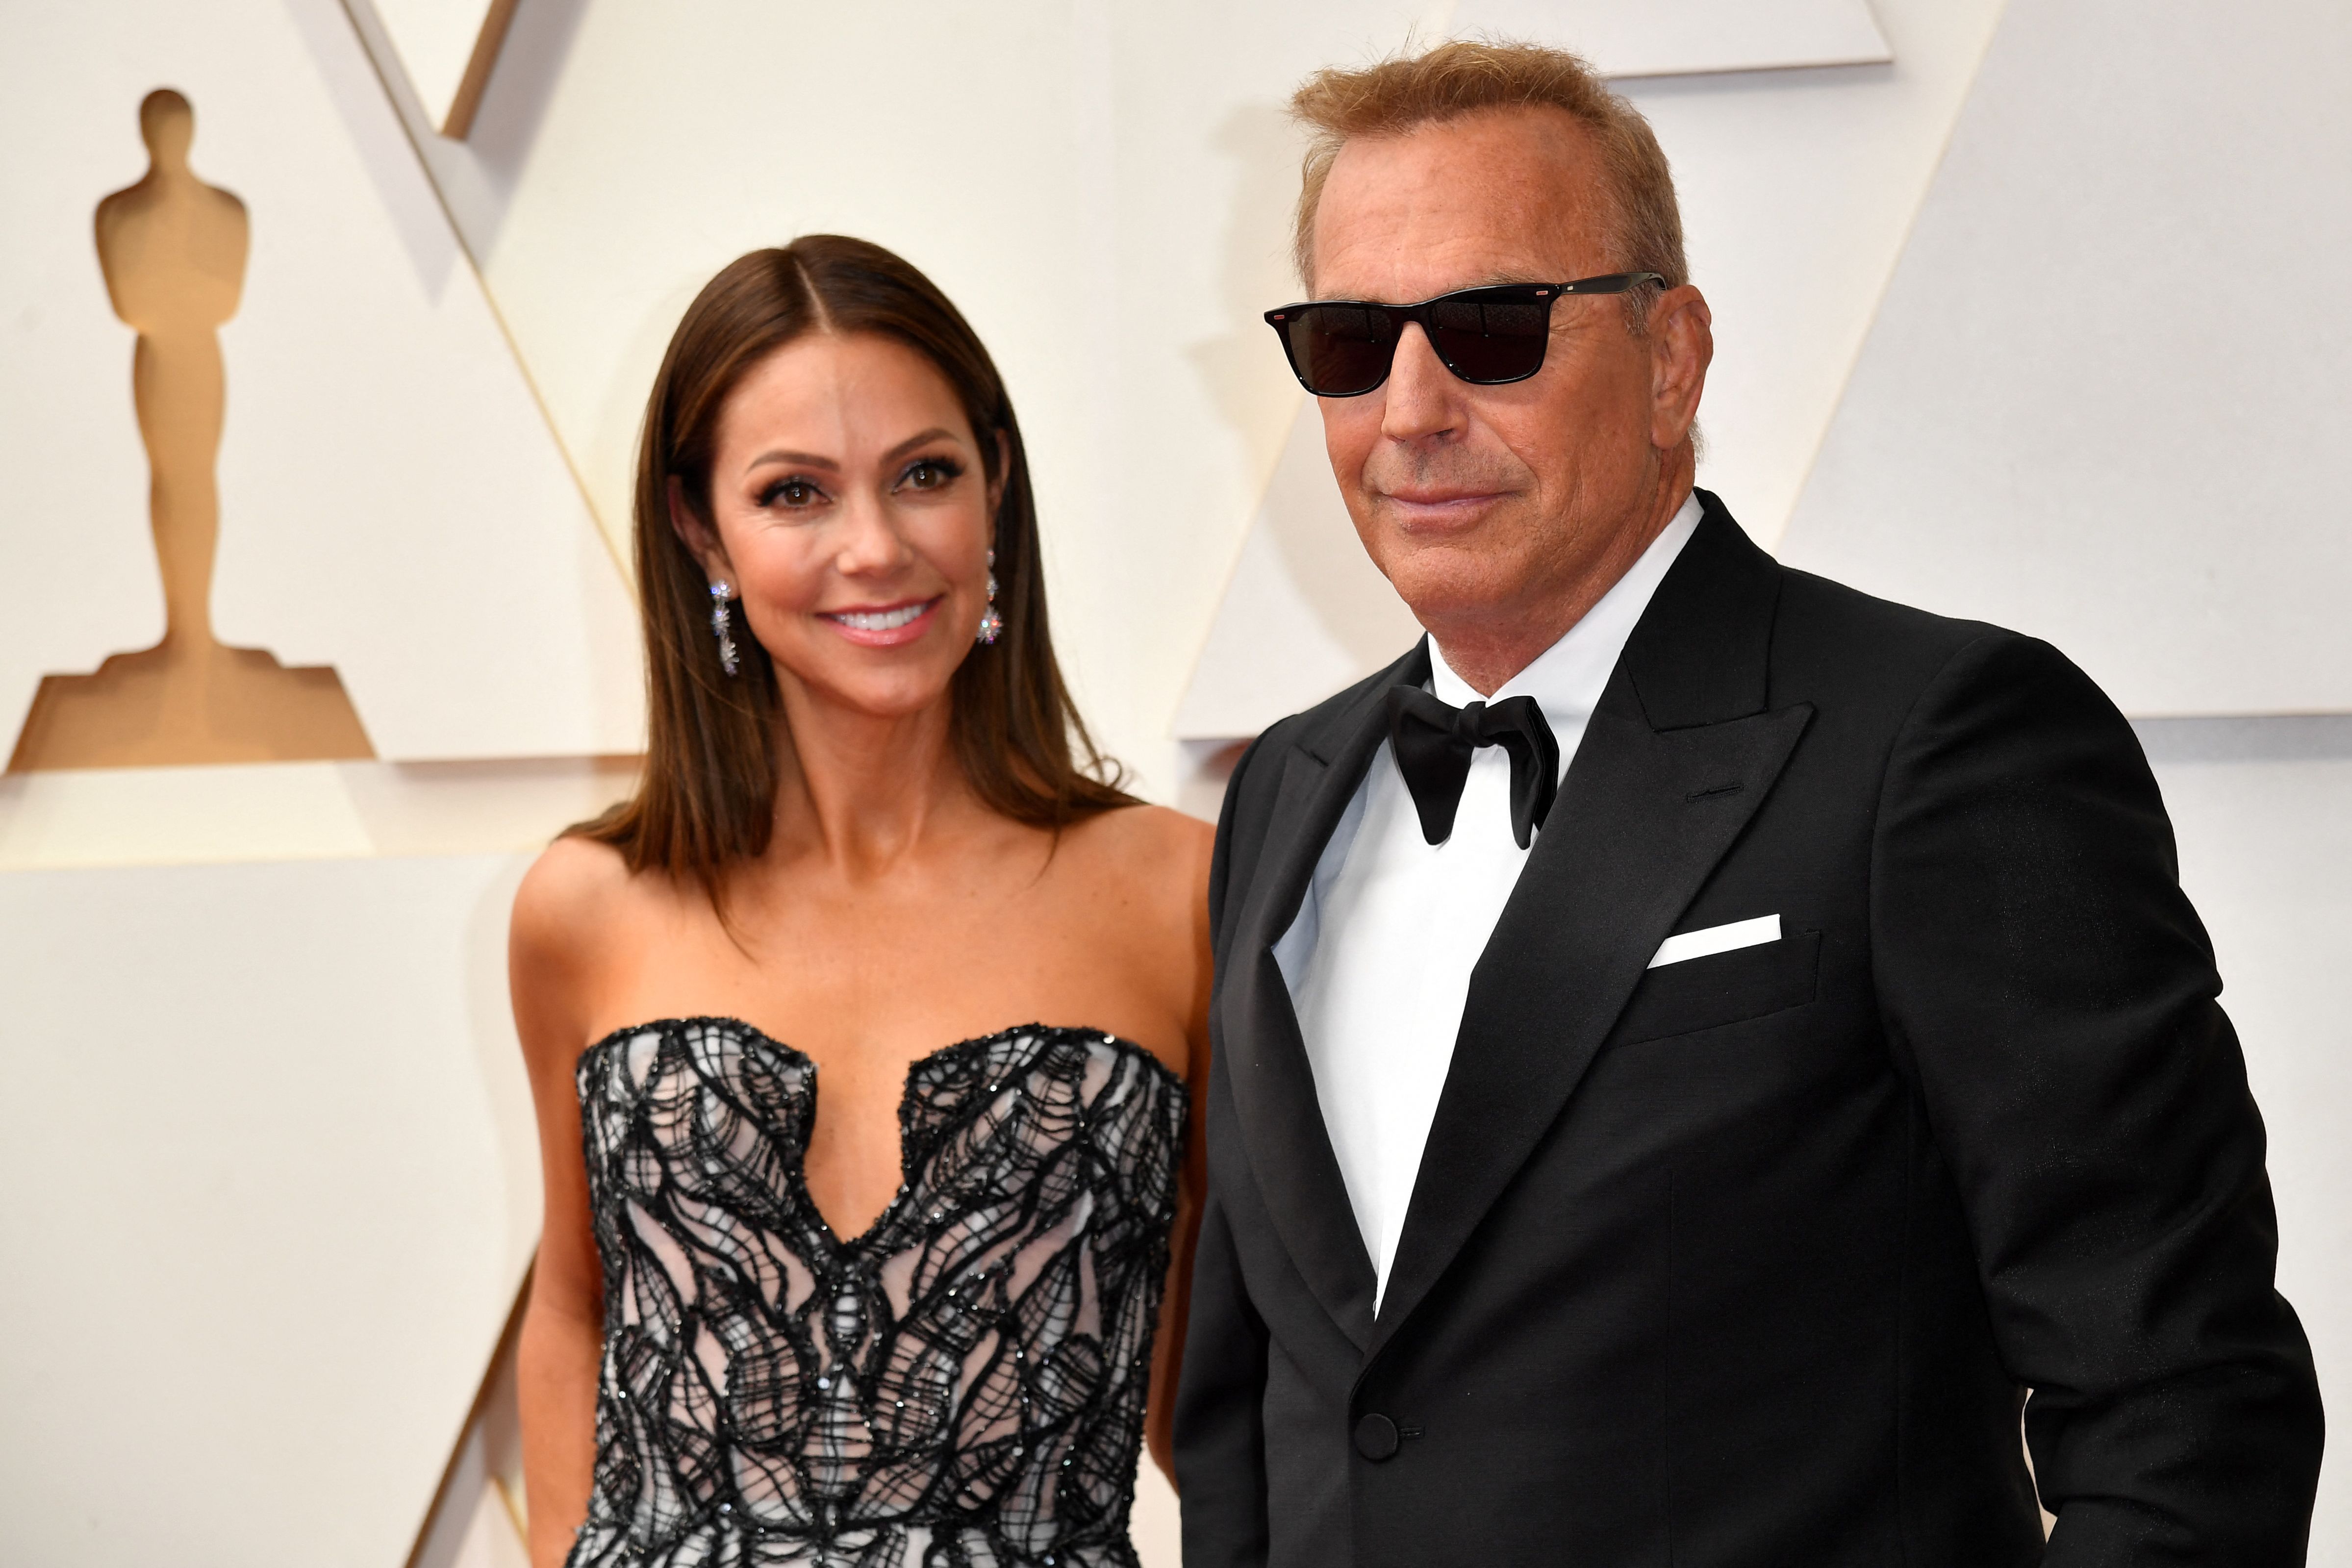 Kevin Costner has been married three times throughout his career